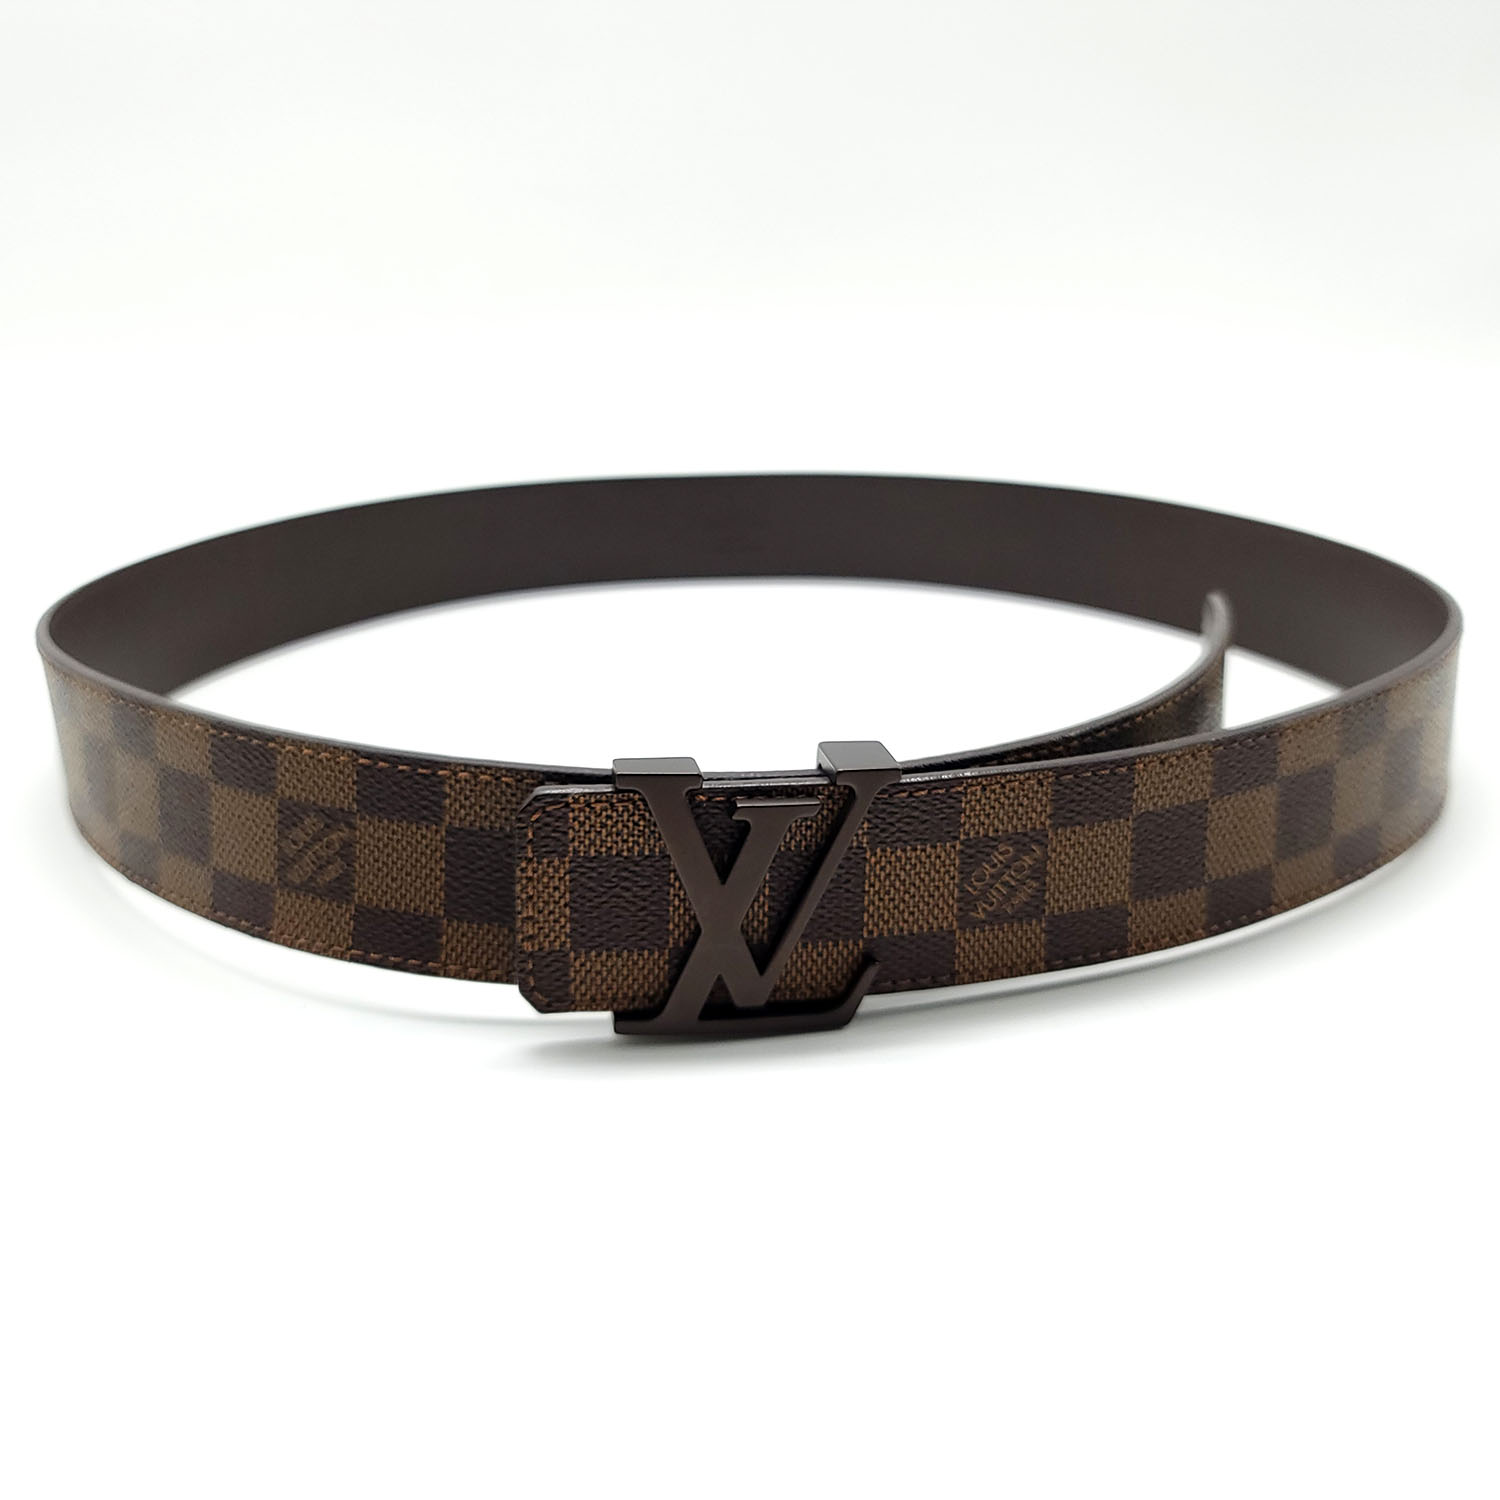 Initiales leather belt Louis Vuitton Anthracite size 100 cm in